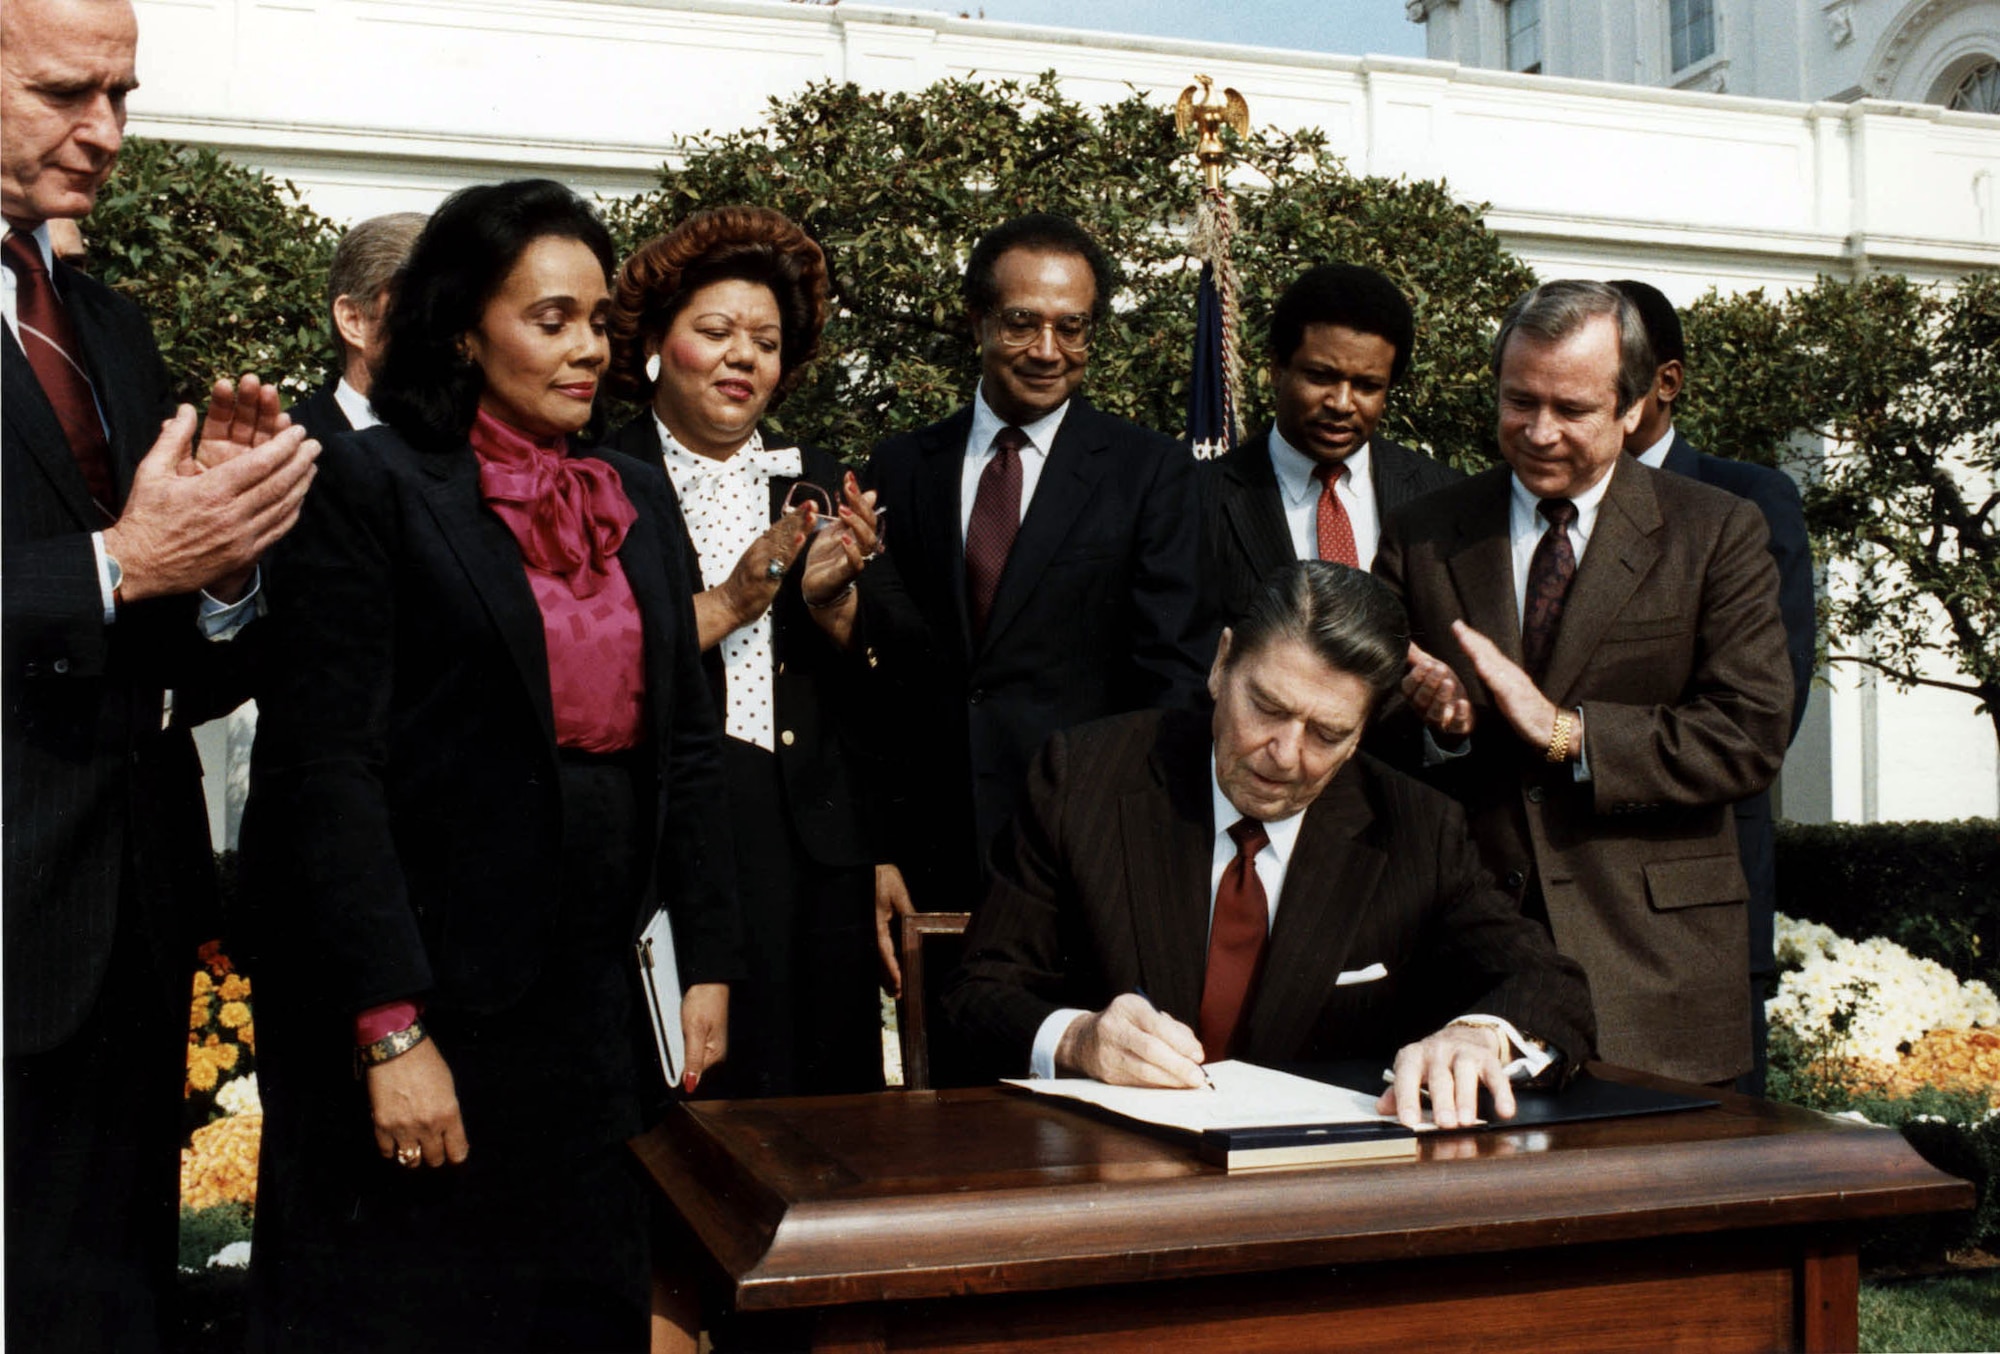 WASHINGTON (AFPN) -- Then-President Ronald Reagan signs the bill commemorating Martin Luther King Jr.'s birthday as a national holiday on Nov. 2, 1983 in the White House rose garden. The first observation was Jan. 20, 1986. This year's observance will mark the 77th birthday of Martin Luther King, Jr. and the twentieth anniversary of the national holiday in his honor. The holiday celebrates the life and legacy of Rev. King who was one of America's leading Civil Rights activists. (Courtesy of the Ronald Reagan Presidential Library)